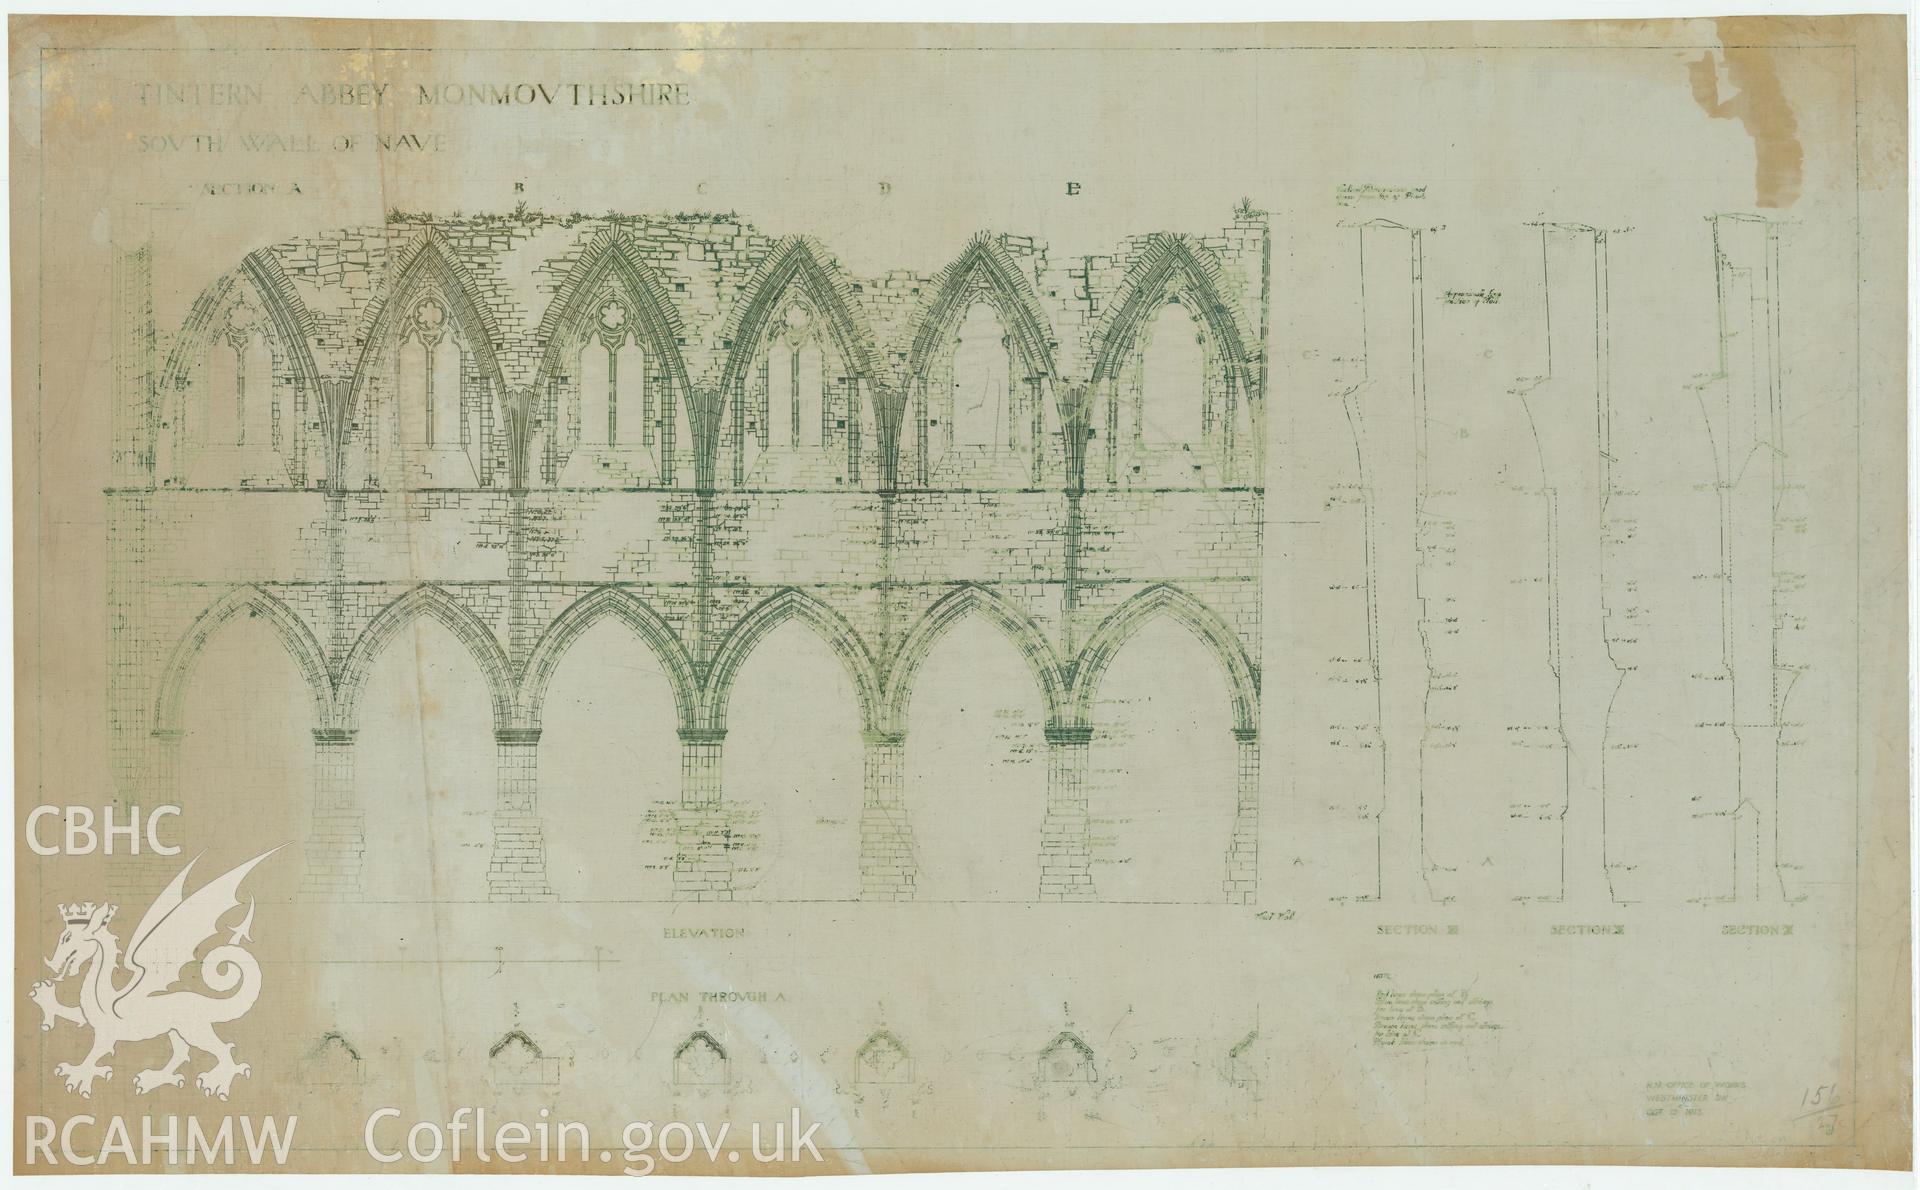 Digital copy of Cadw guardianship monument drawing, green ink on waxed paper, elevation and sections of south wall of nave,  Tintern Abbey.  Dated  29th October 1913.